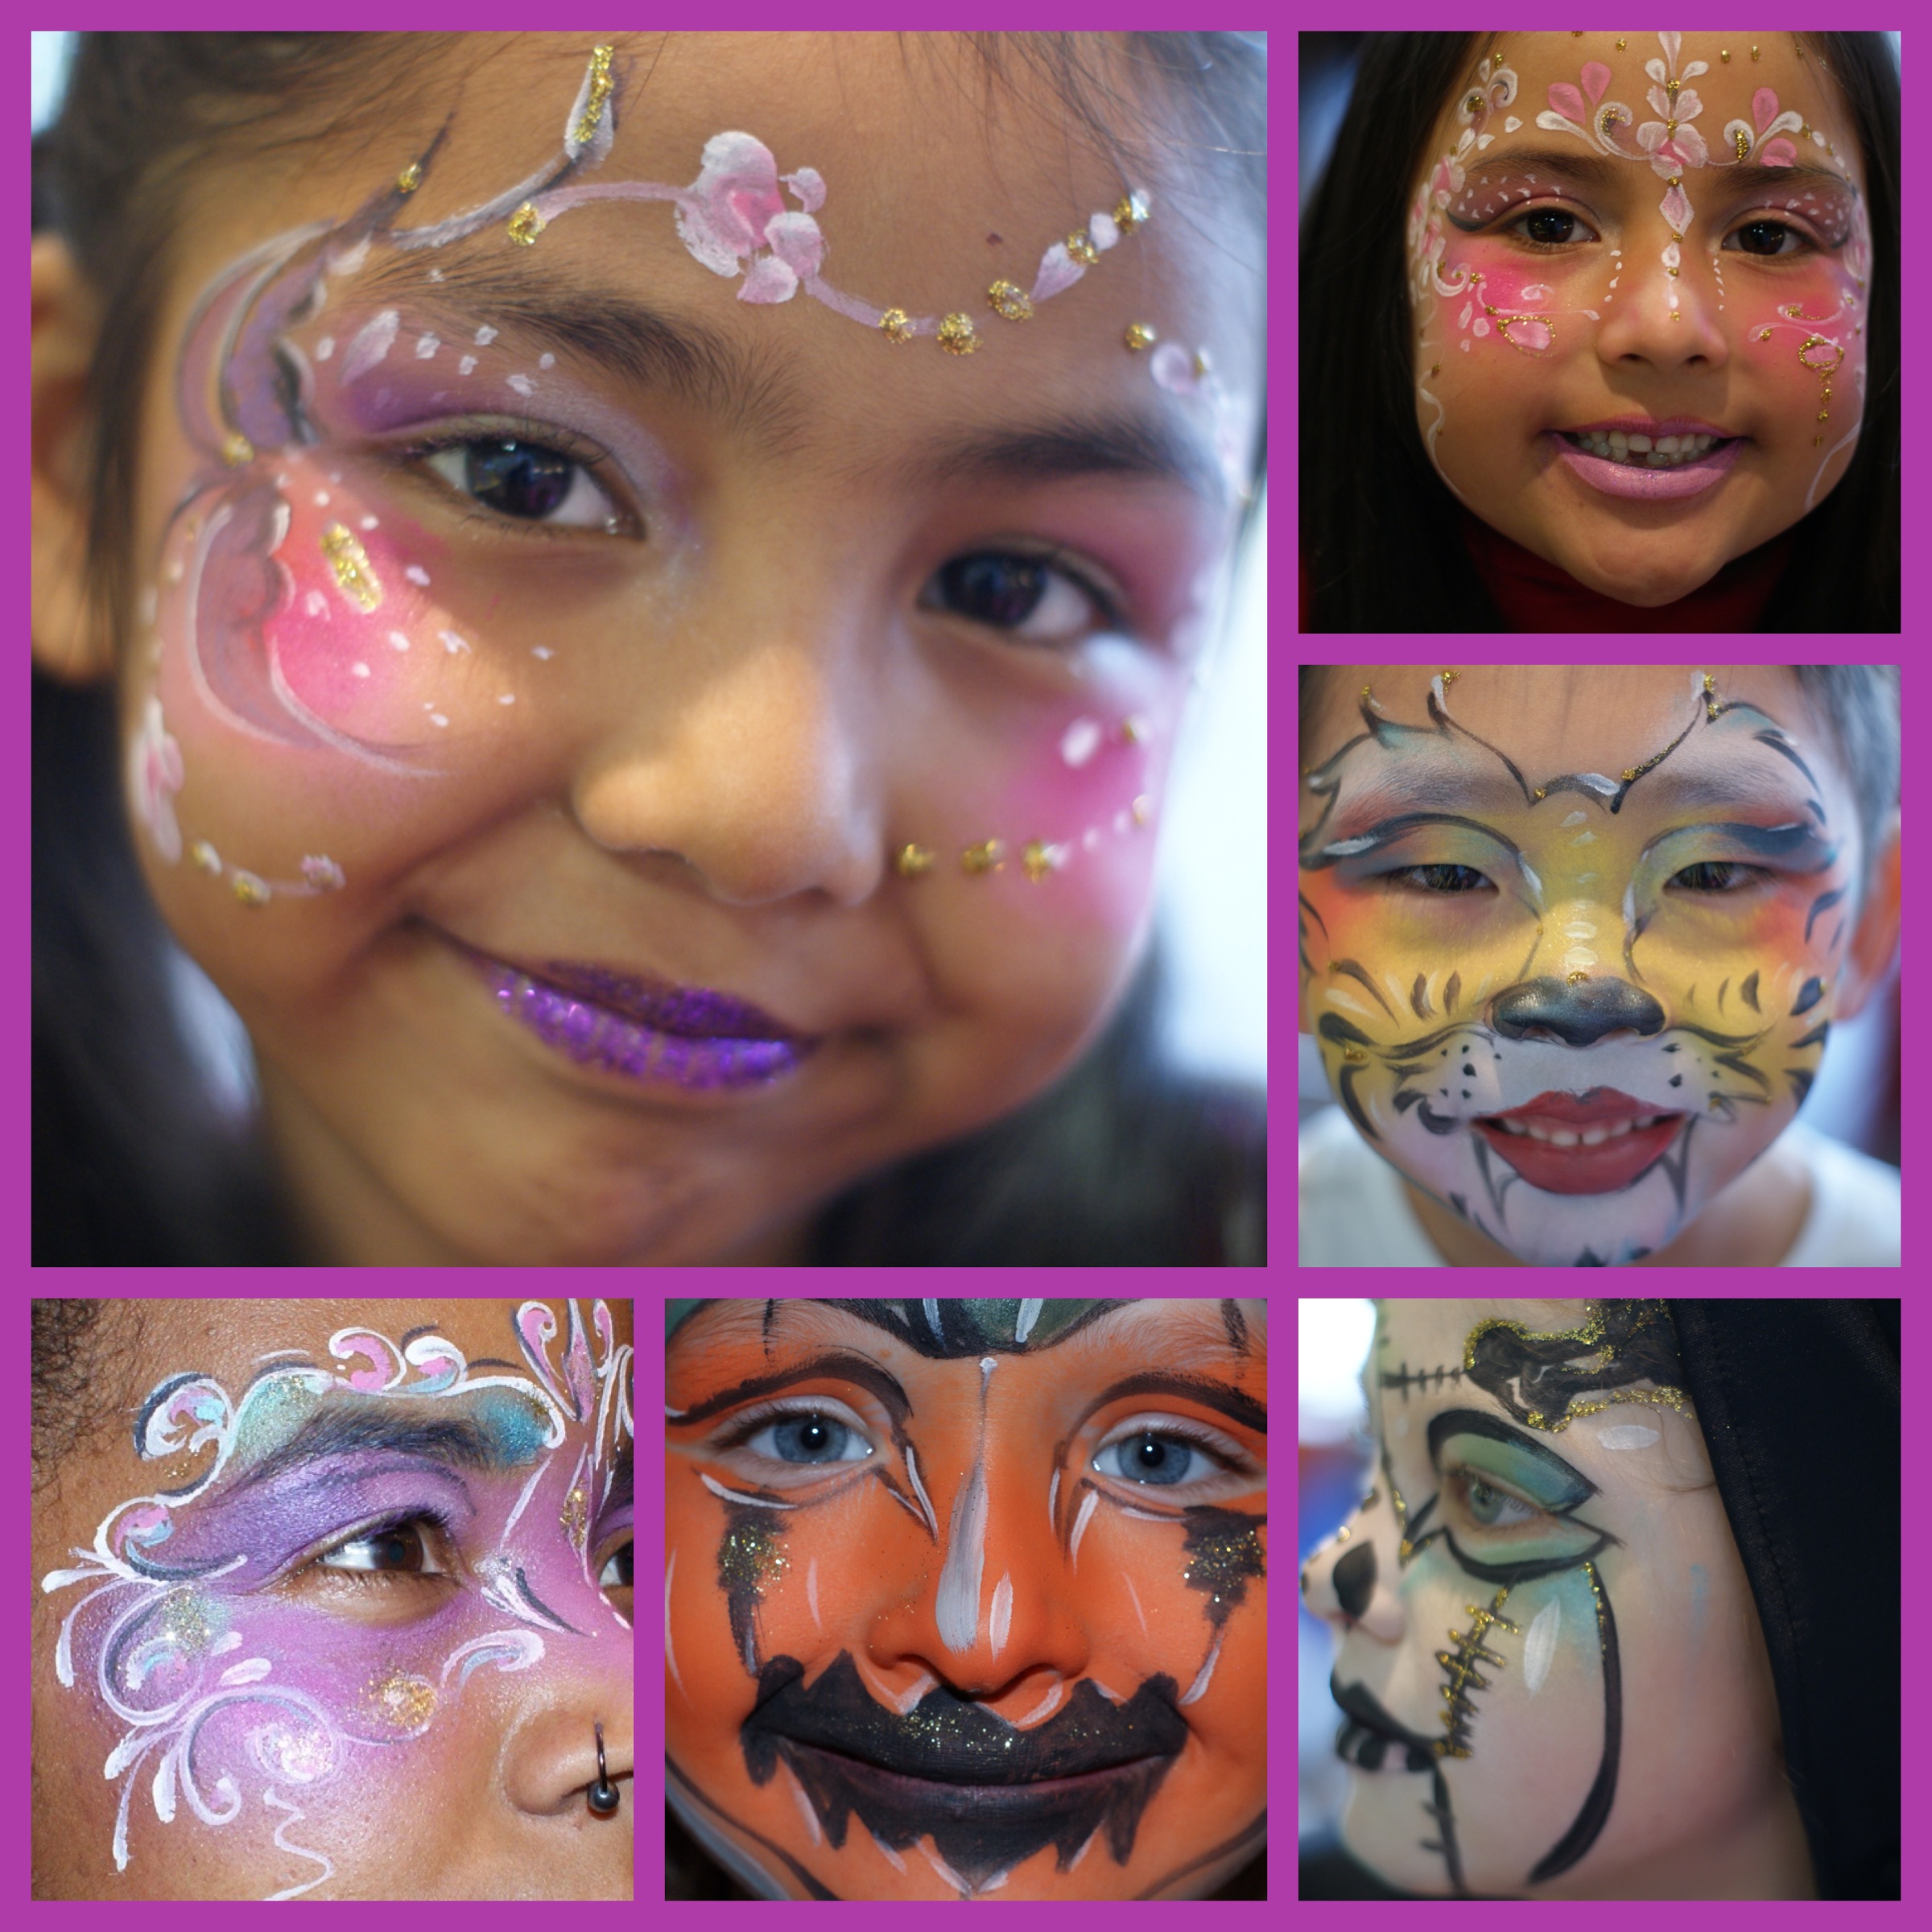 Six photographs of painted faces showing examples of work by London Face Painters at children's partis and family events in London.